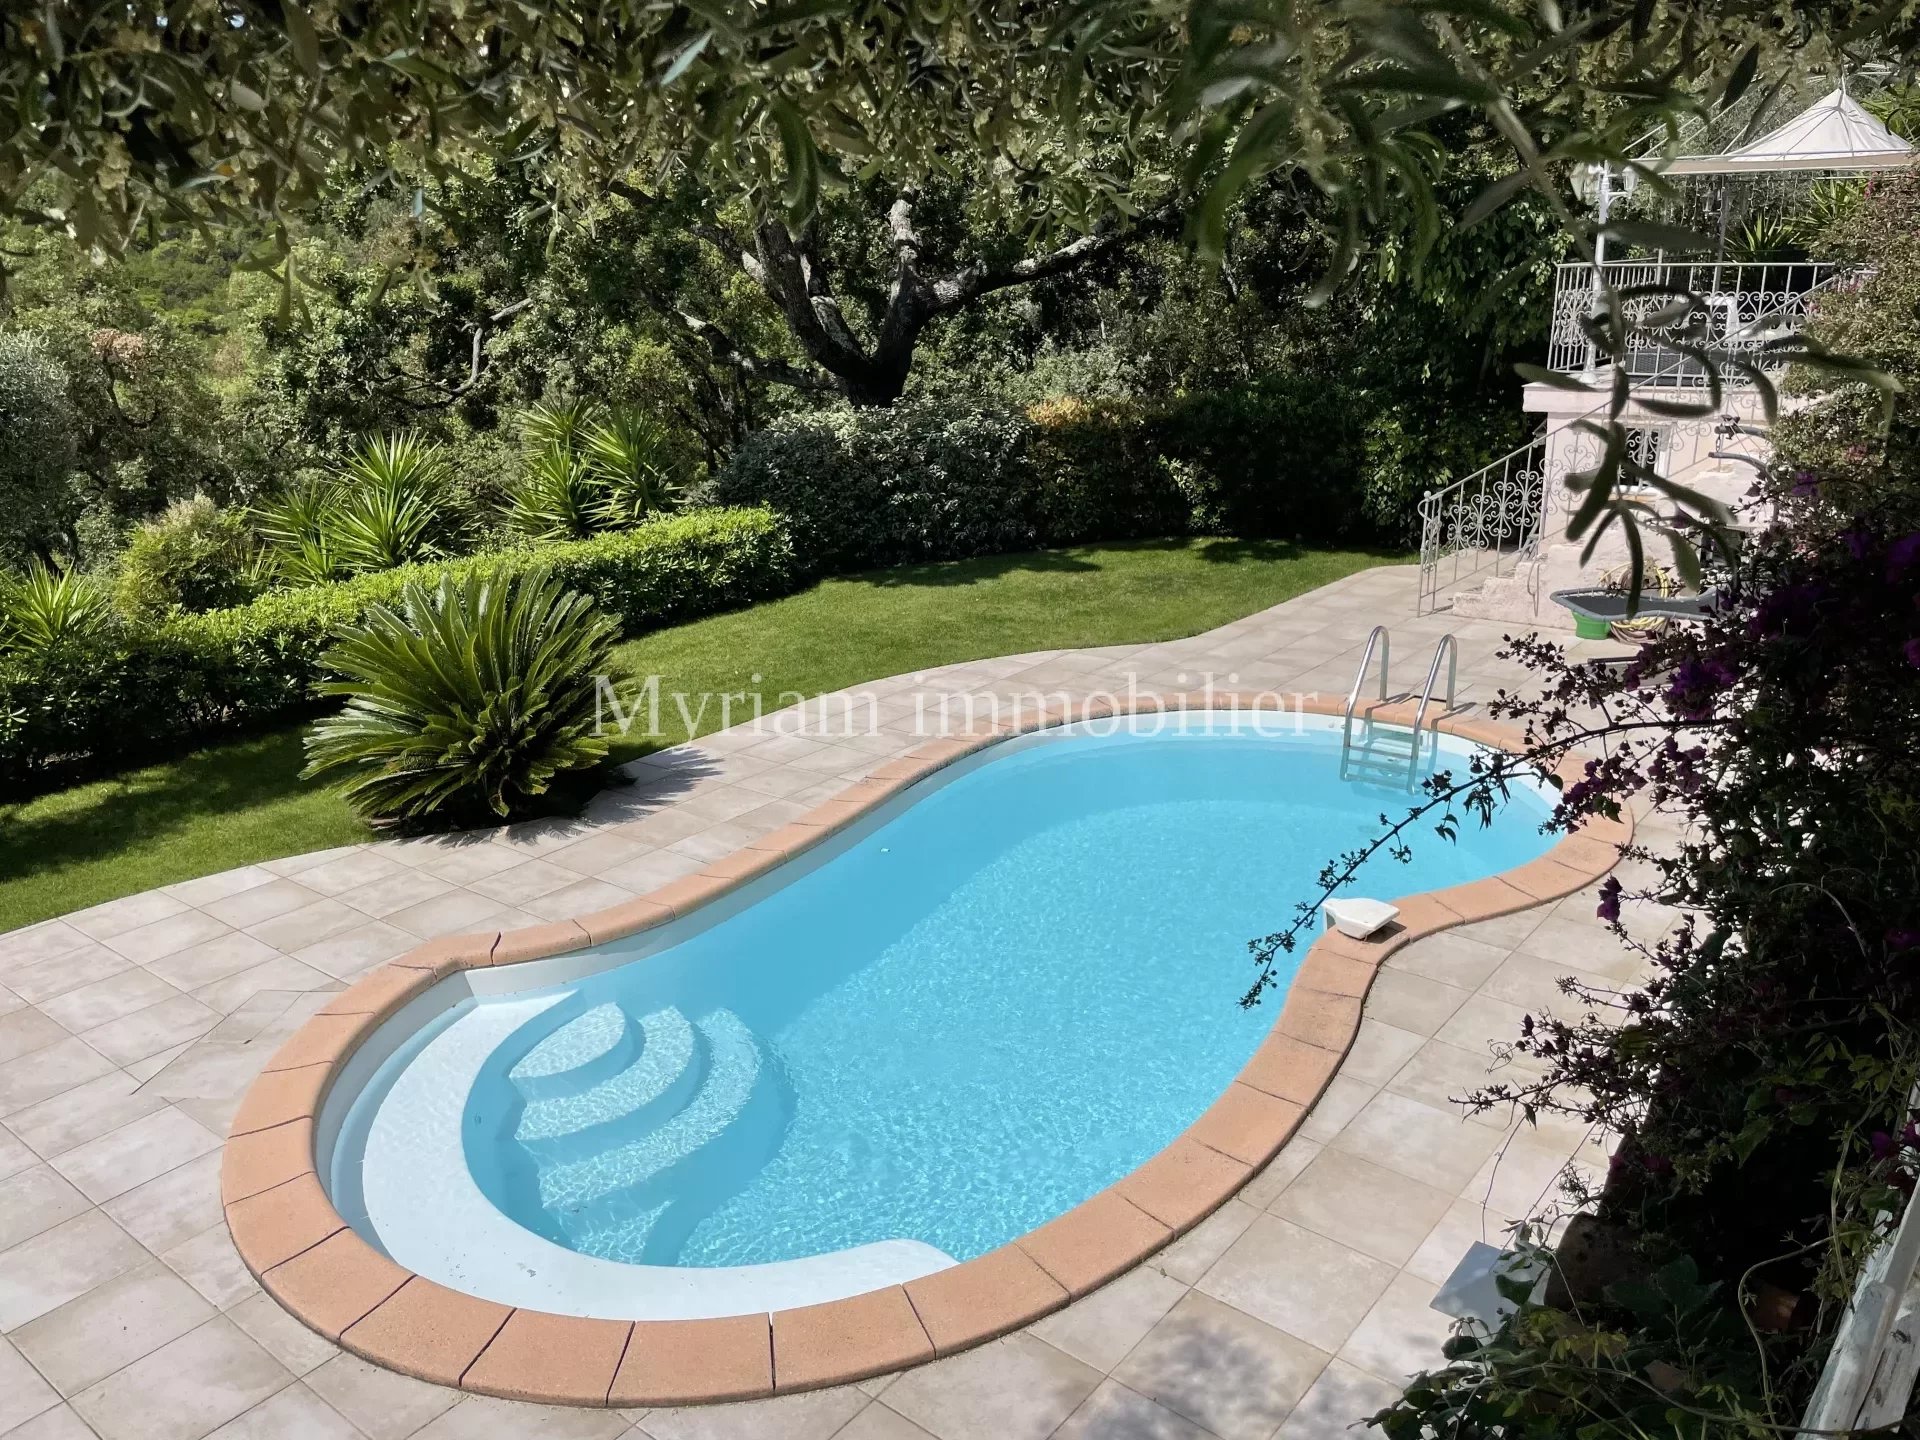 4-room house swimming pool Open sea view in PEYMEINADE